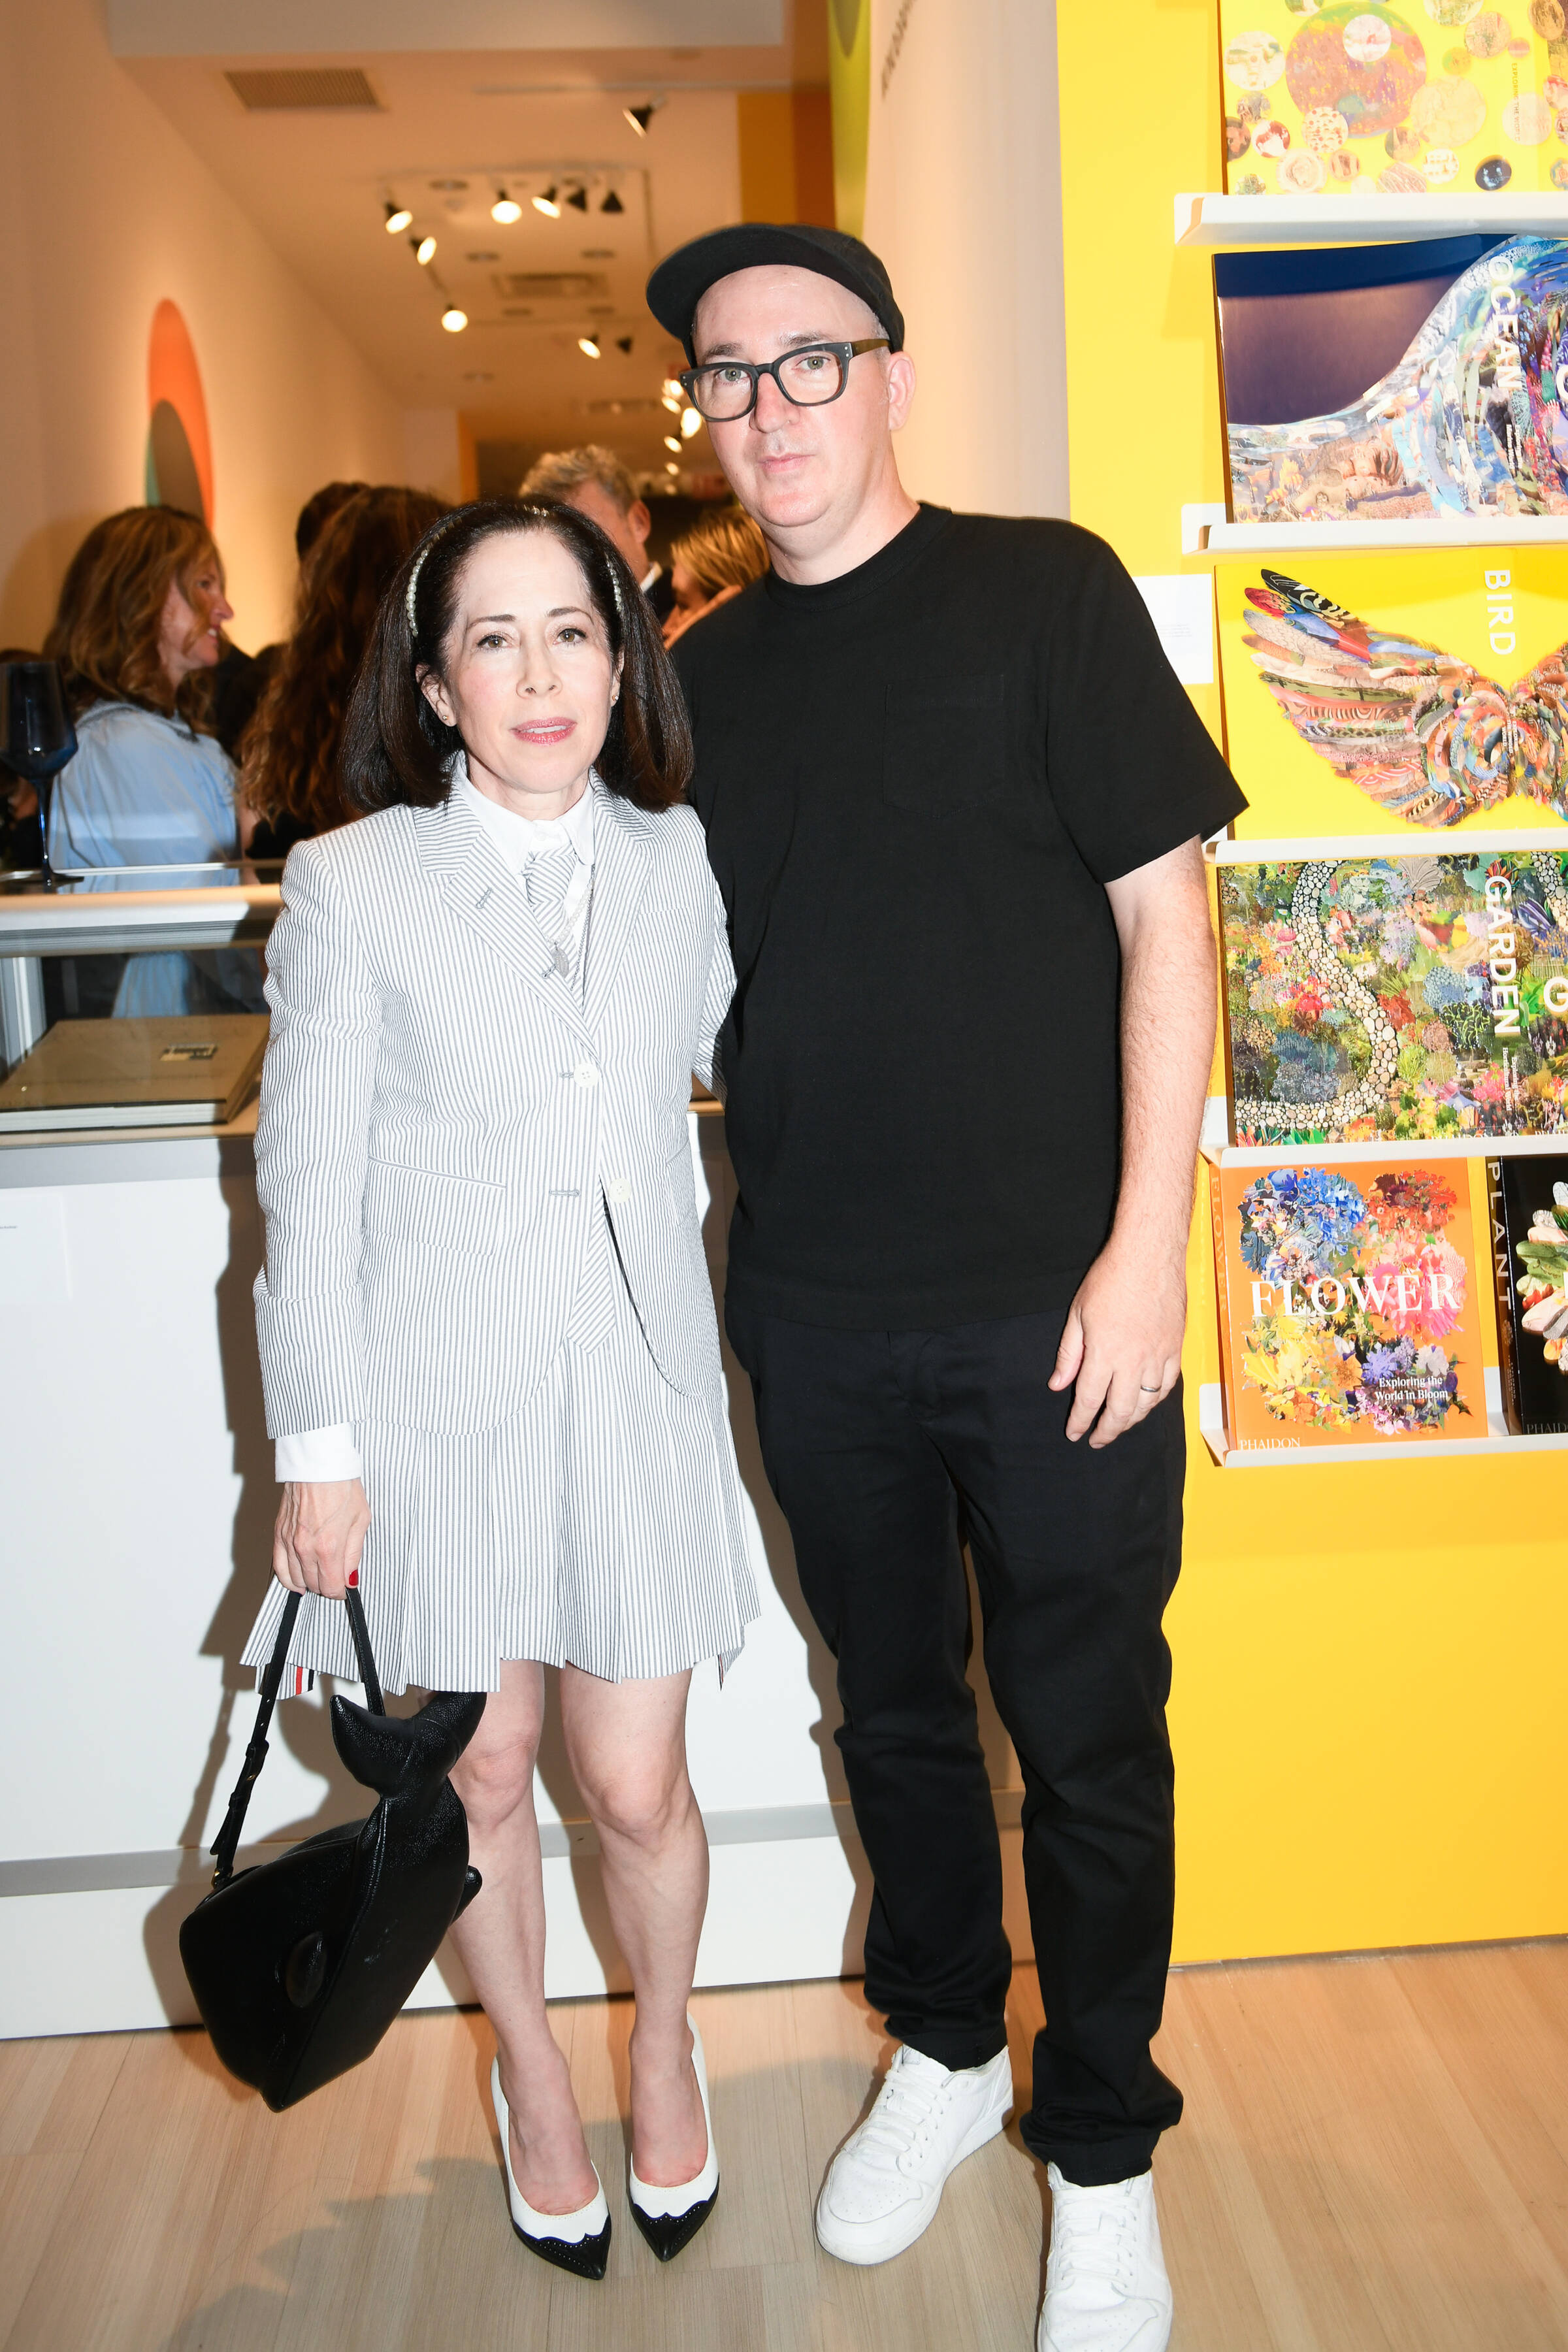 Phaidon 100 event/ party Christie's coverage rough